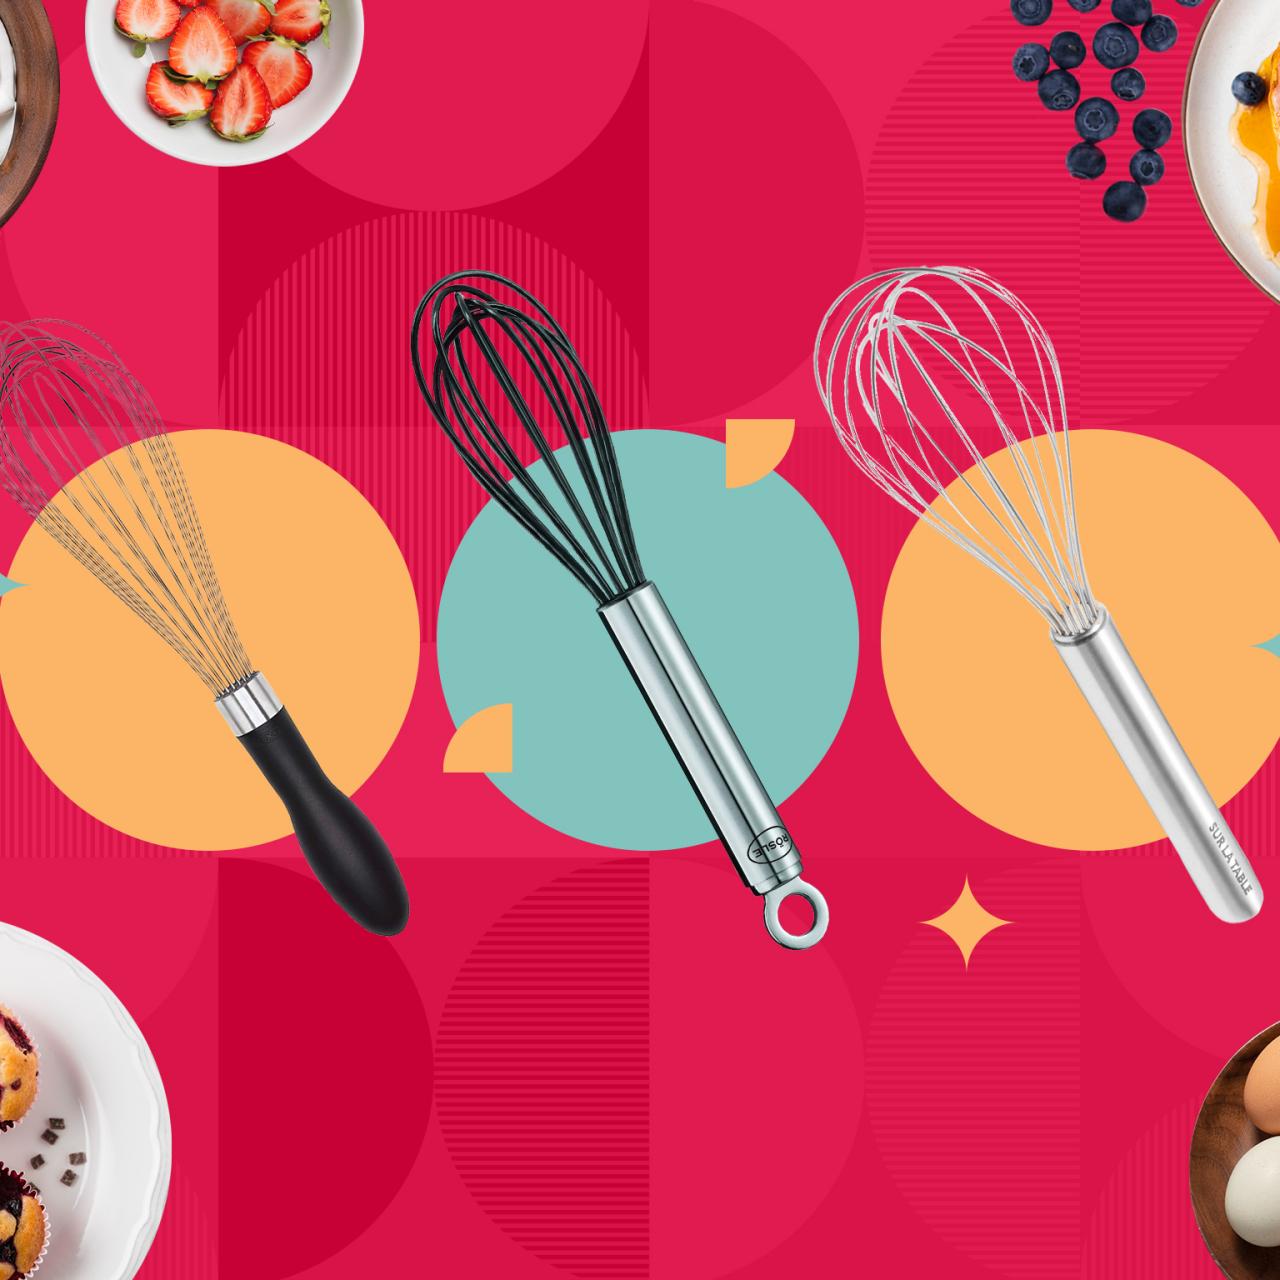 7 Best Whisks of 2024 - Reviewed